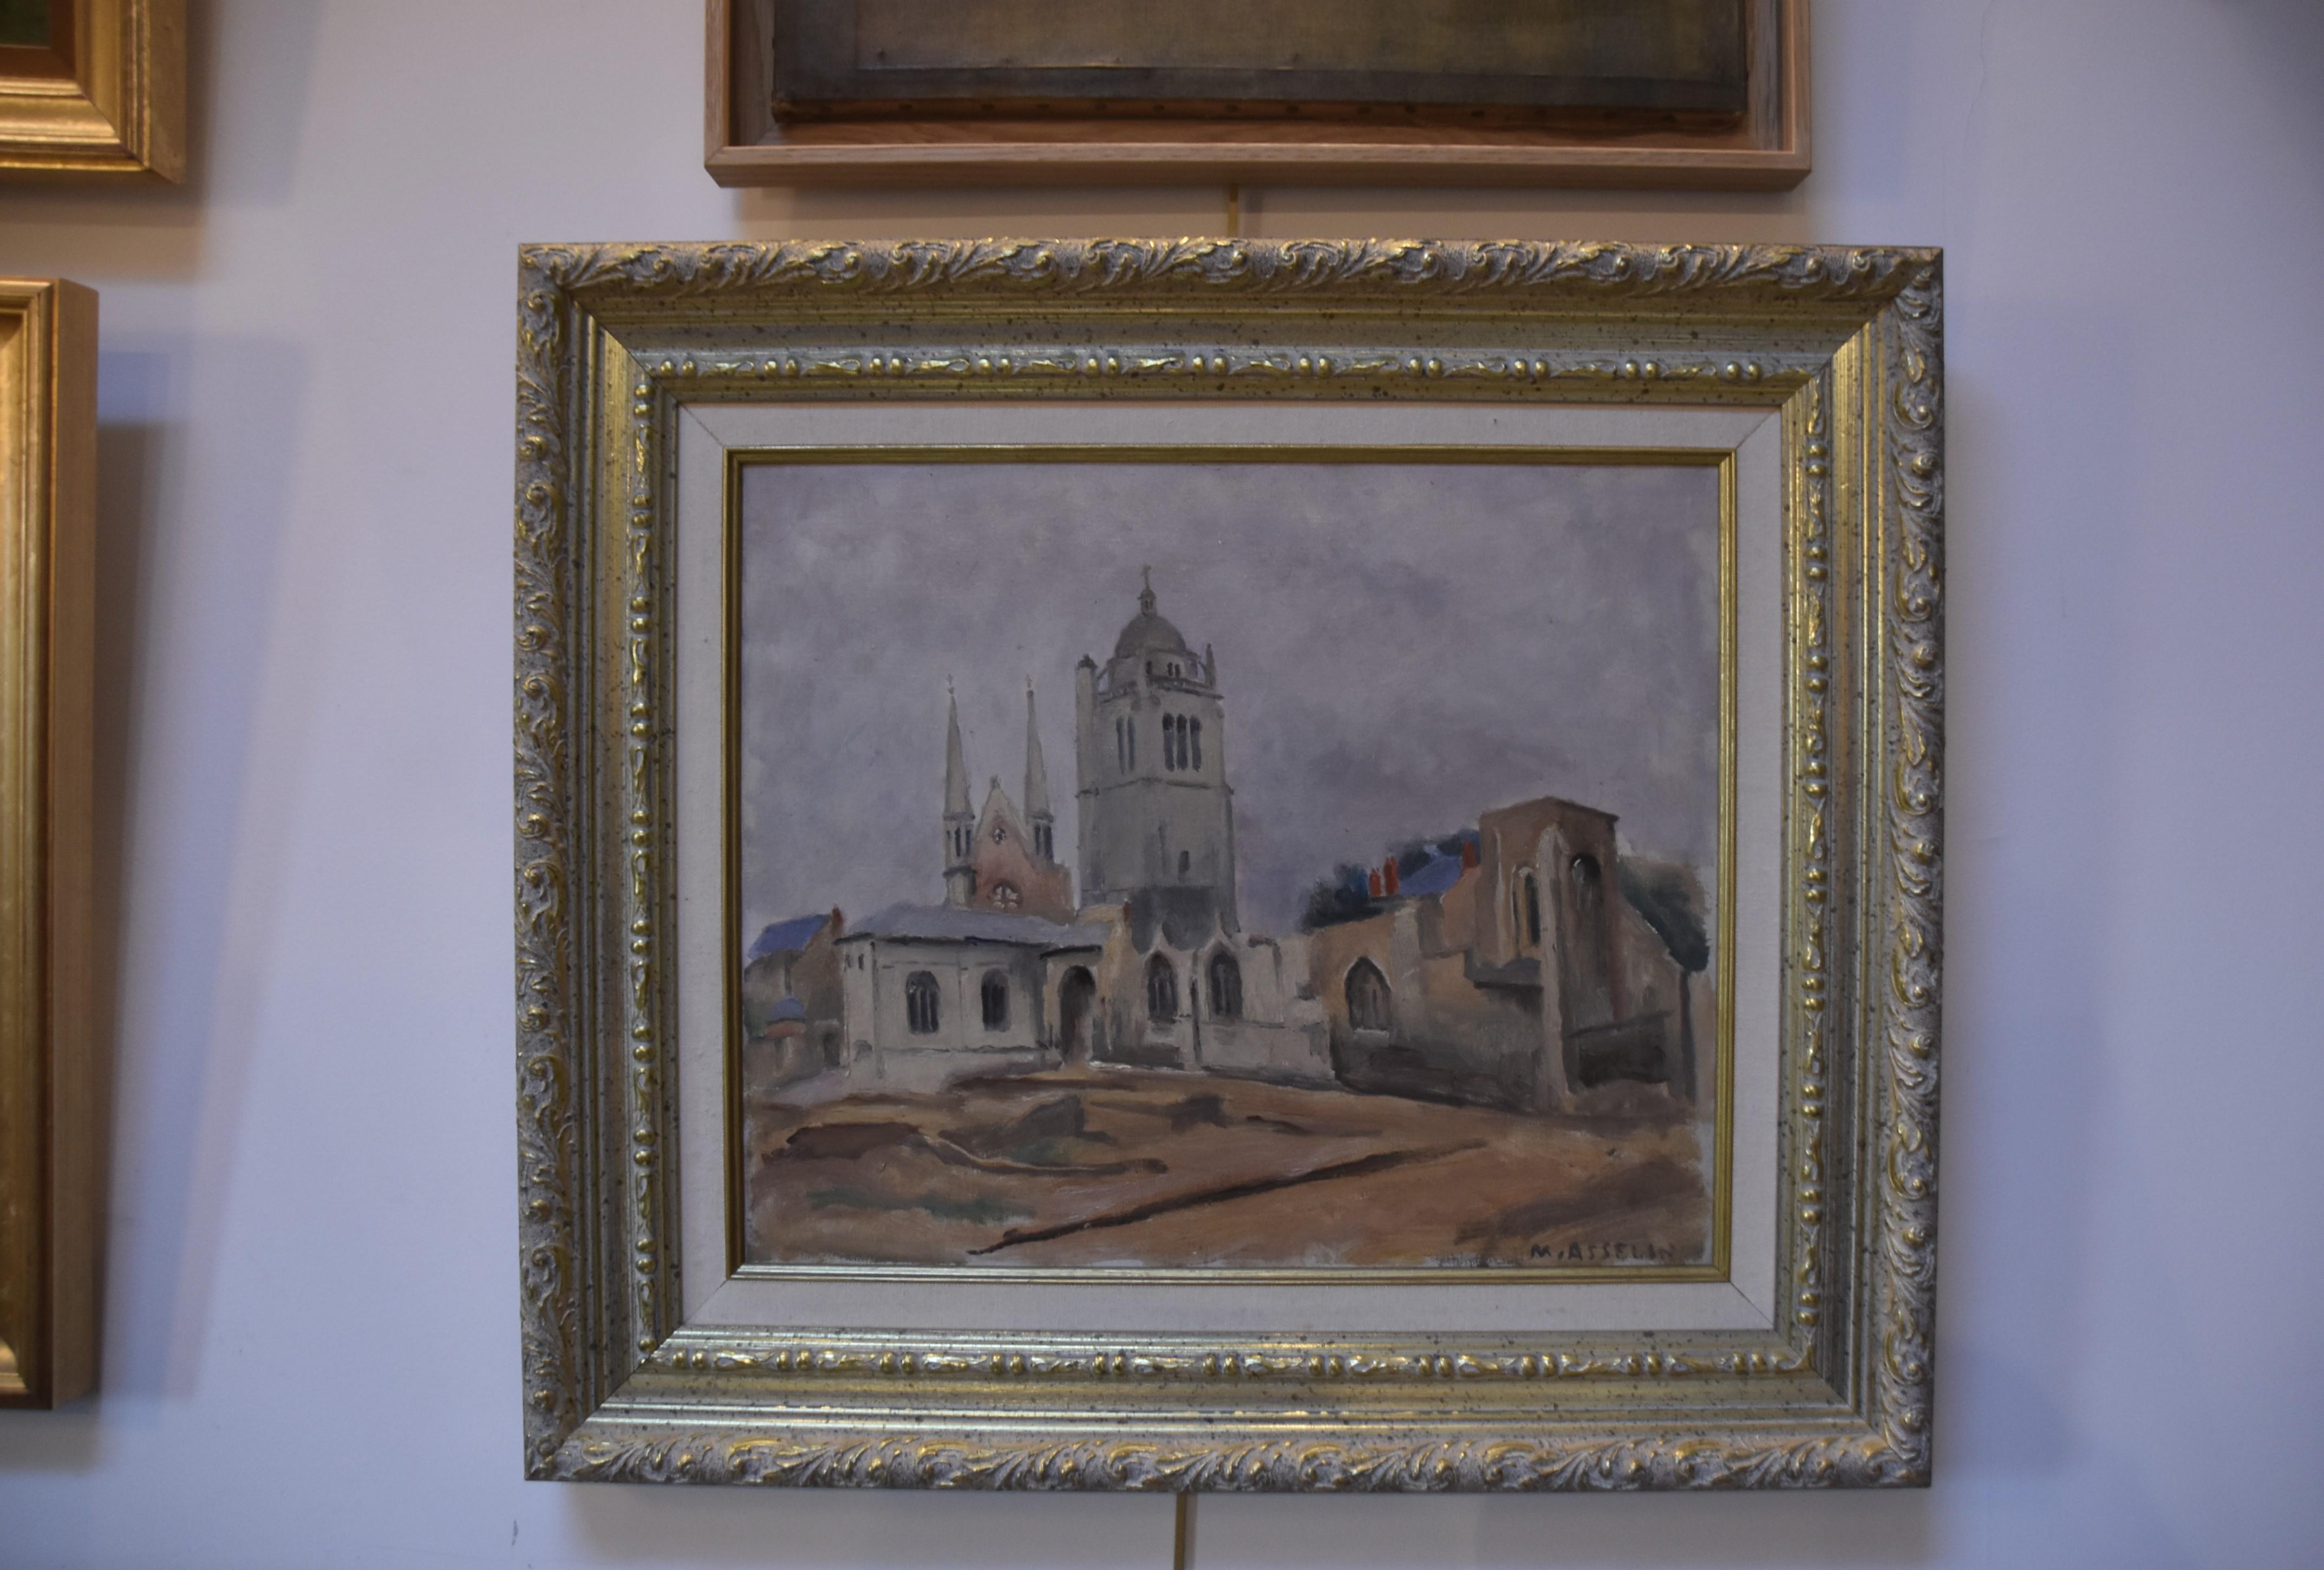 Maurice Asselin (1882-1947) 
Saint Paul Church in Orleans
Signed lower right
Oil on canvas
38 x 46 cm
In good condition
In its original frame : 56 x 64 cm  

The subject of this painting has recently been identified thanks to a collector. A dating